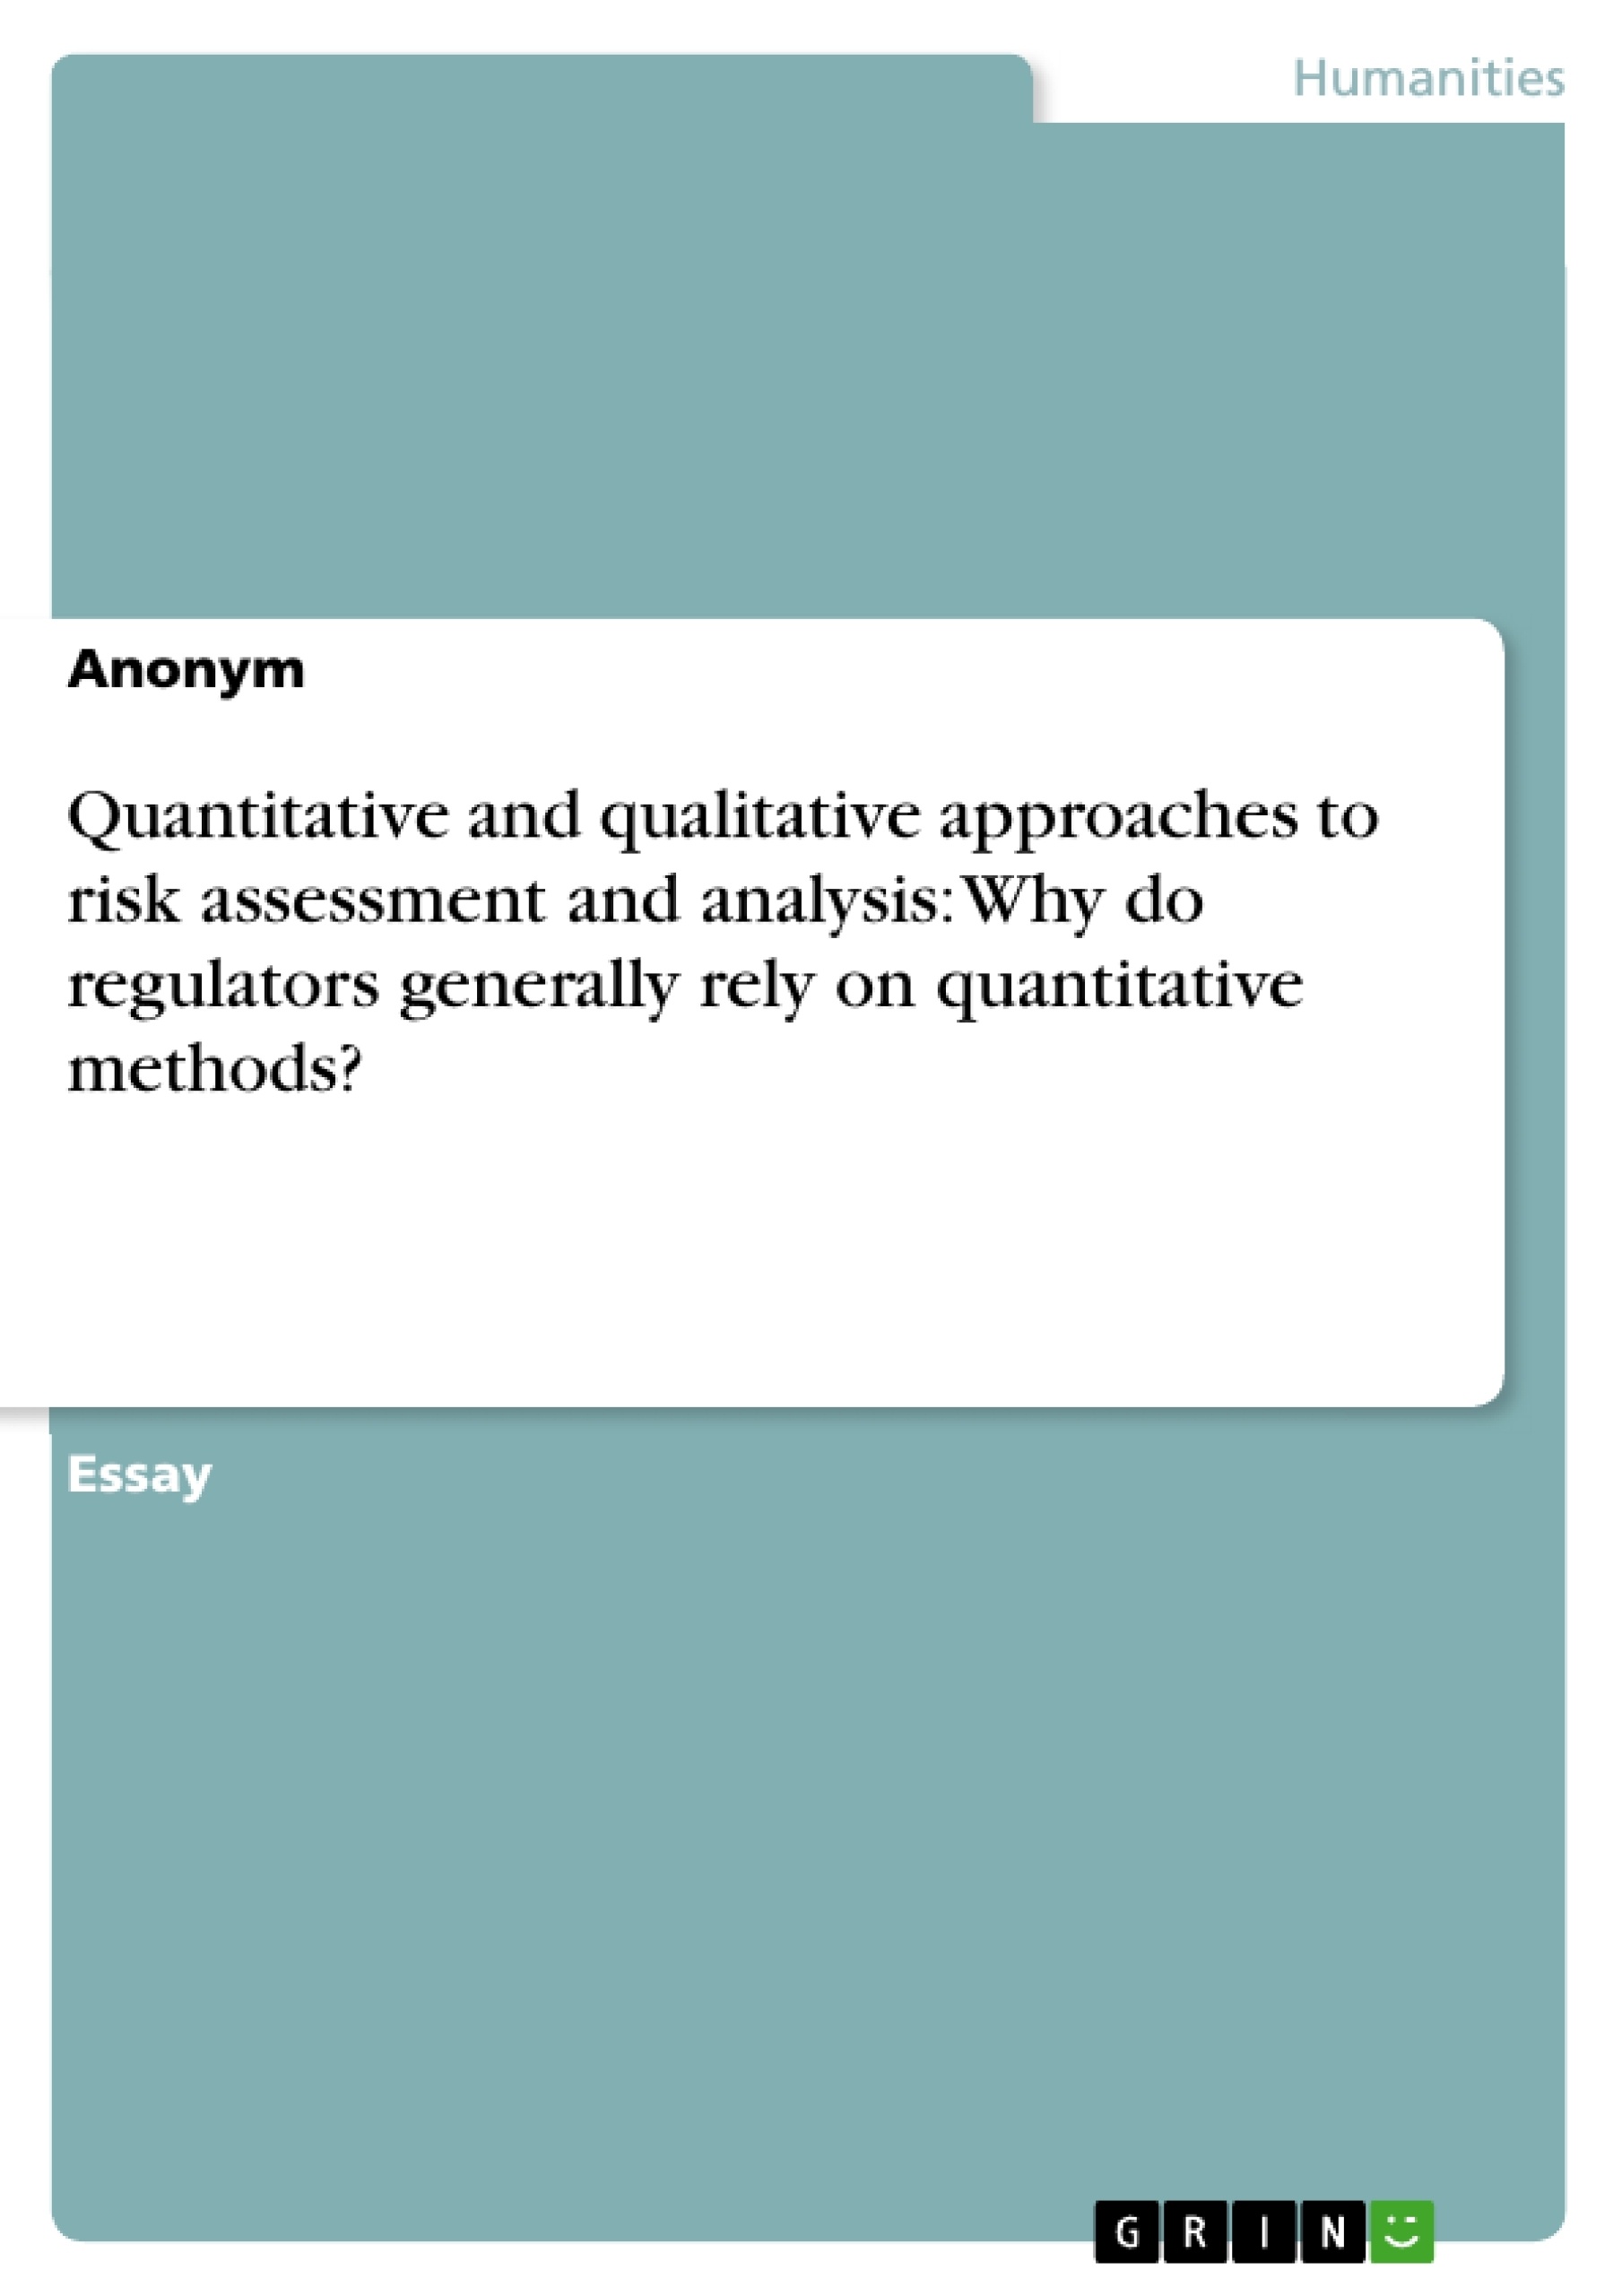 Title: Quantitative and qualitative approaches to risk assessment and analysis: Why do regulators generally rely on quantitative methods?